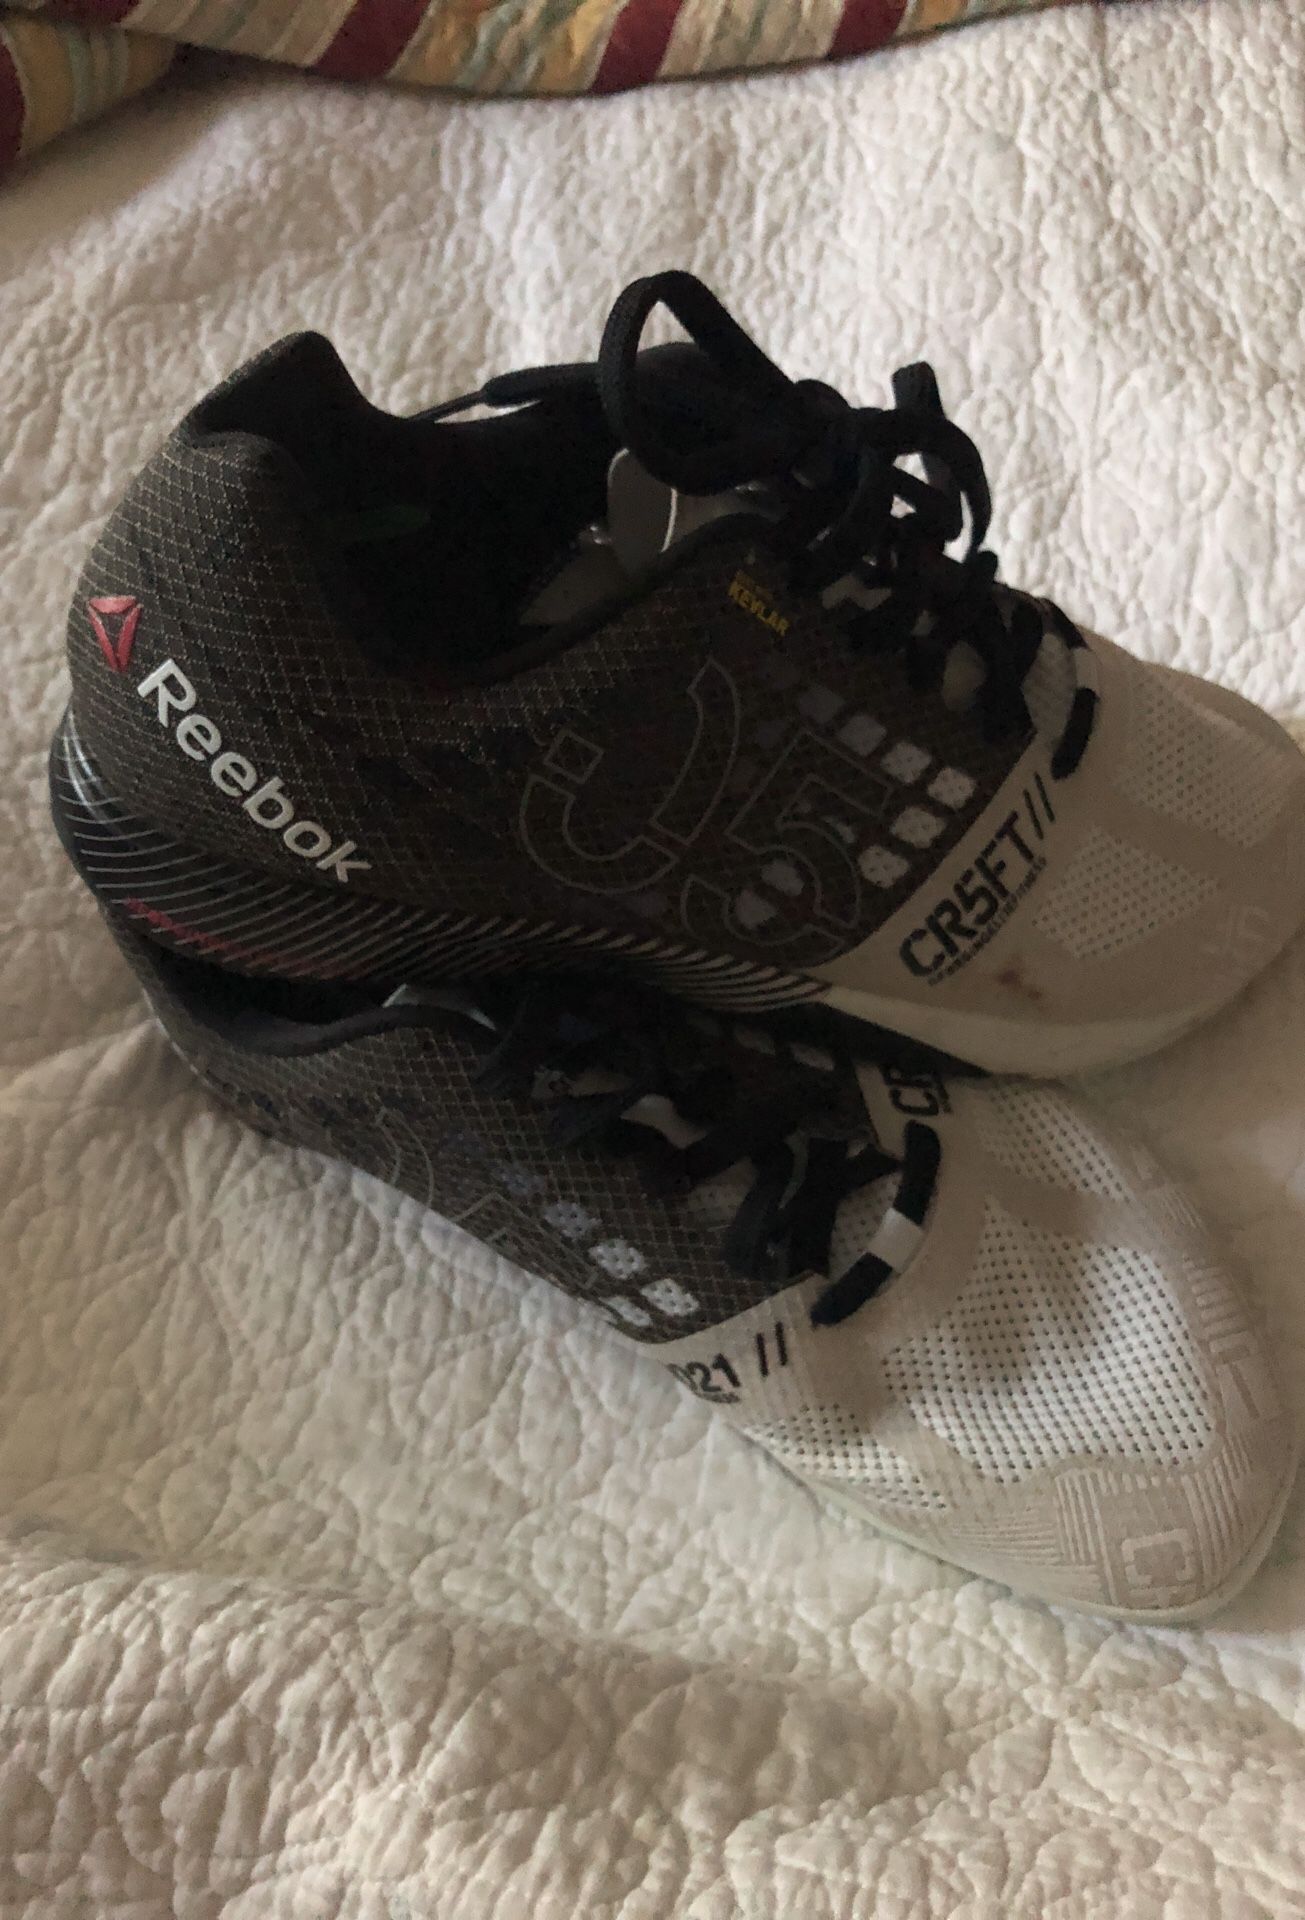 Reebok CrossFit cr5ft size 13 for Sale in Cove, NC - OfferUp